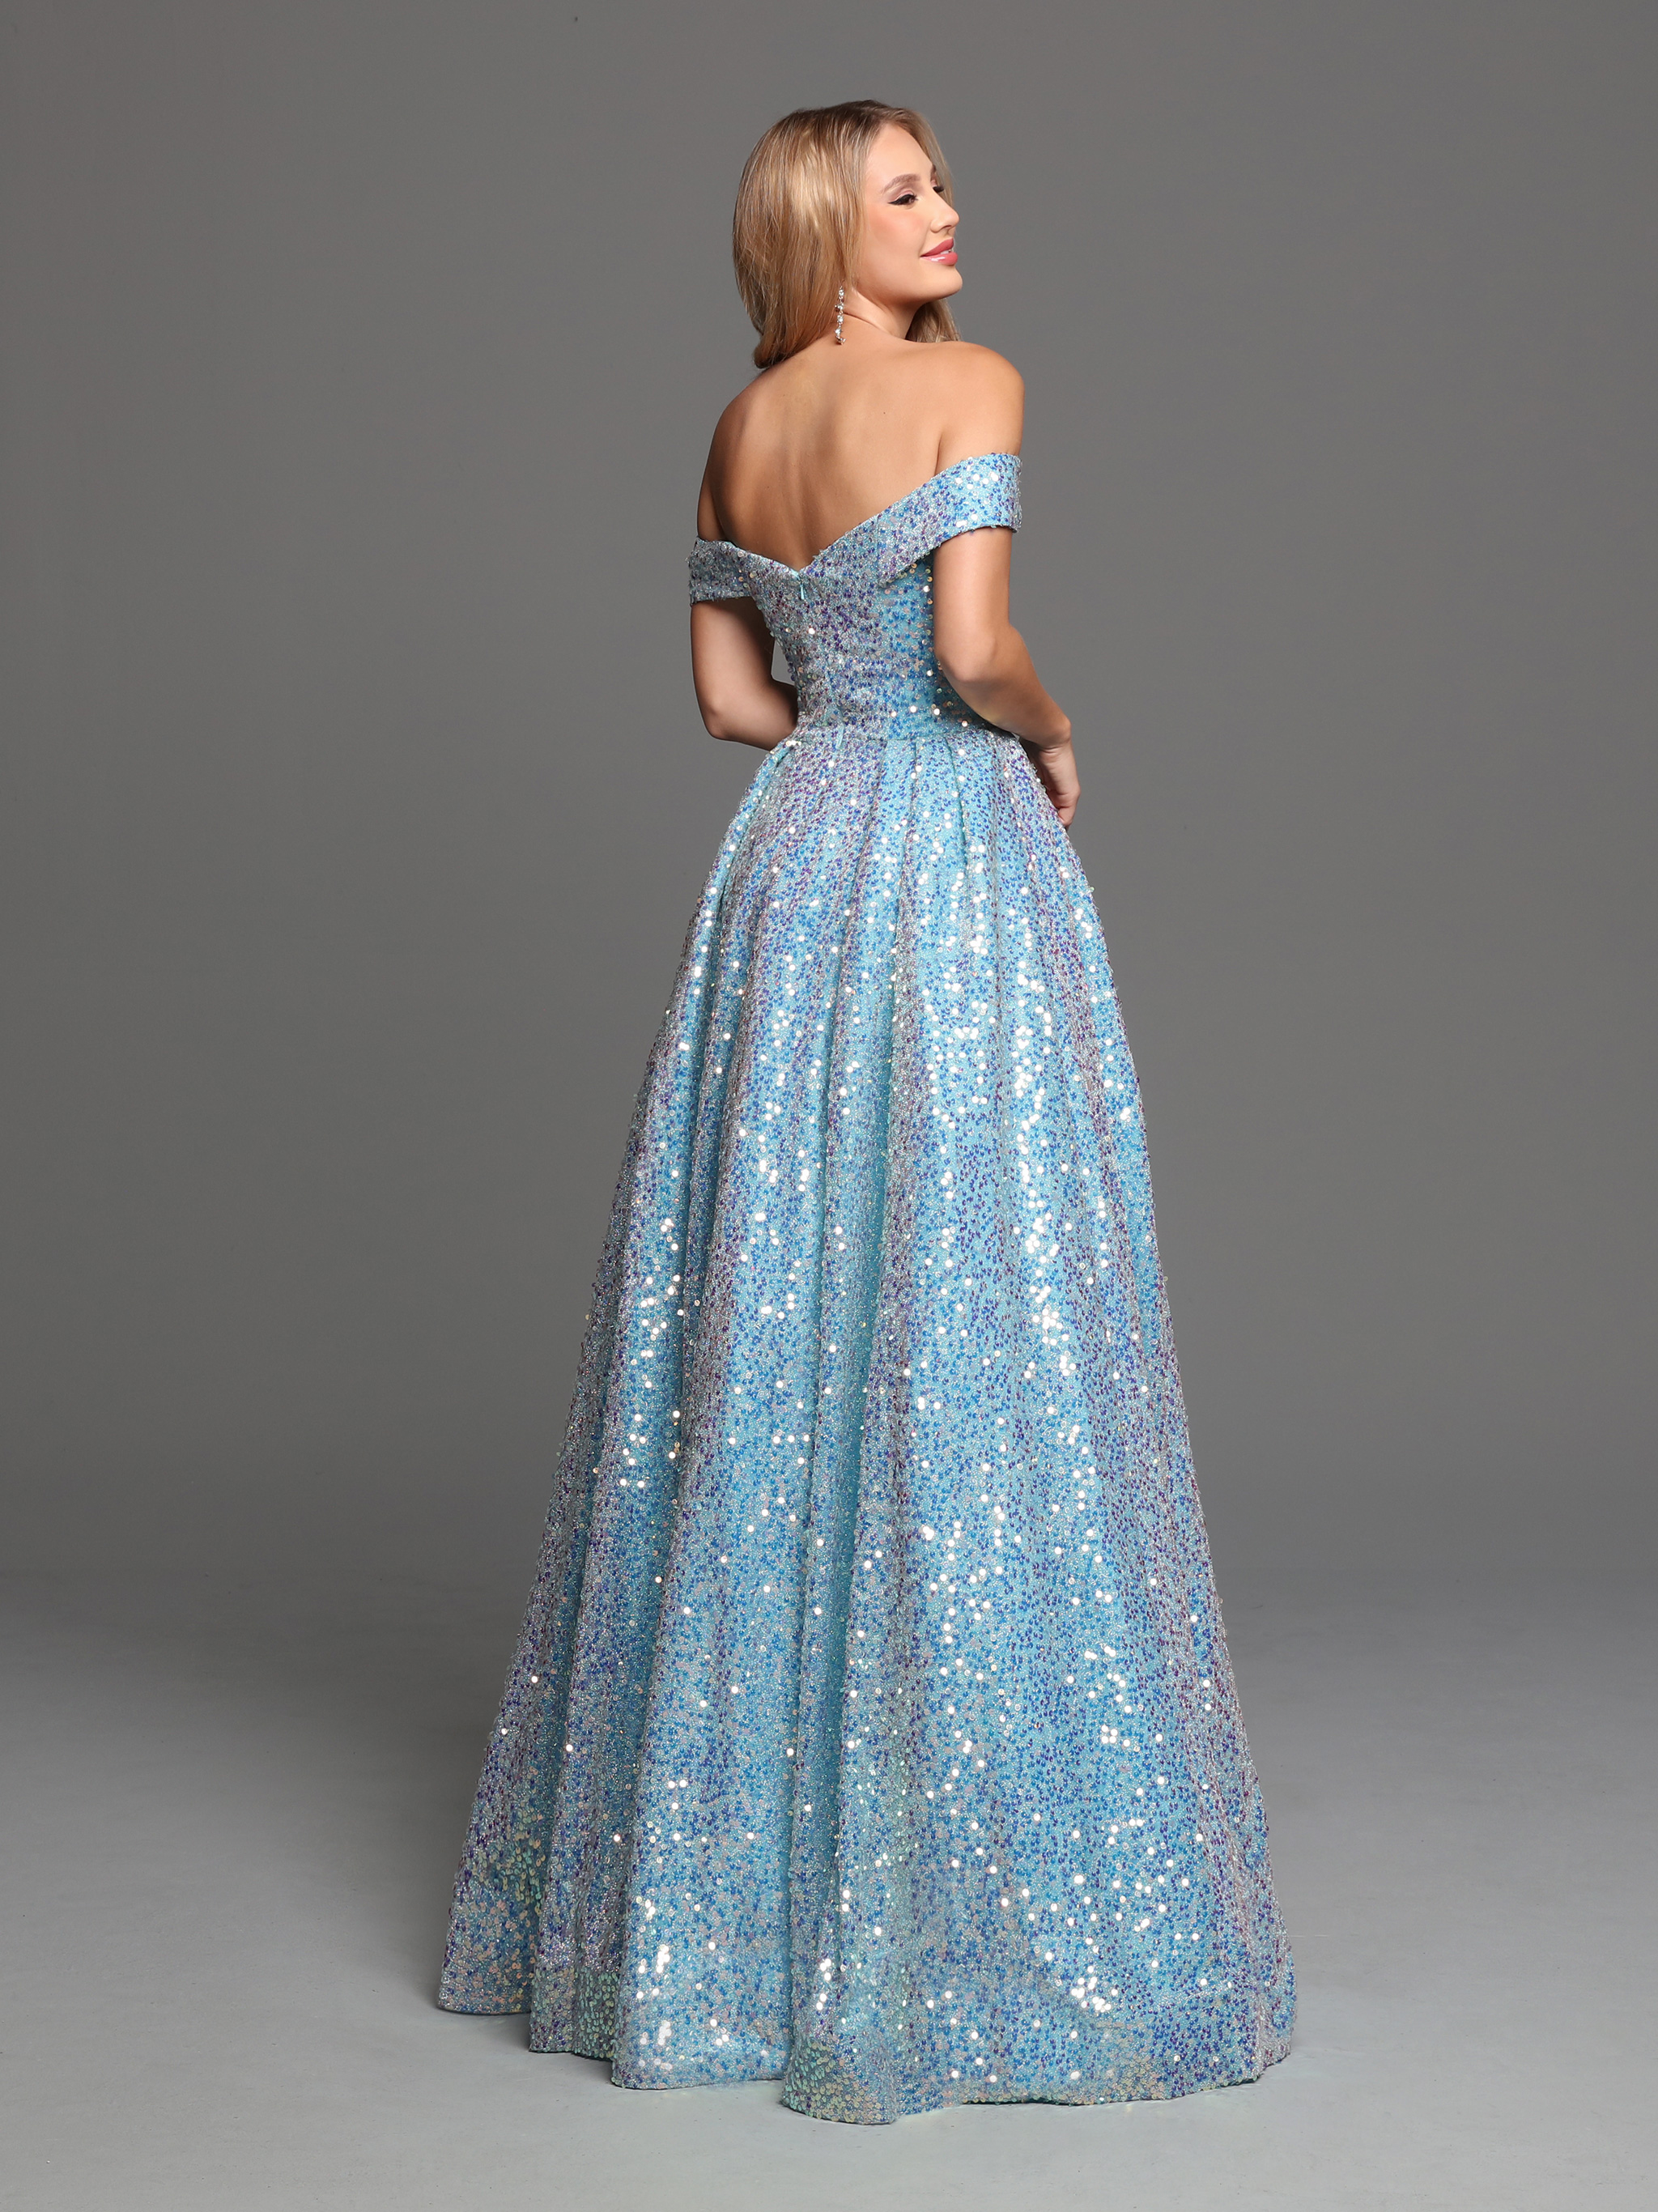 Back view of Style : 72261